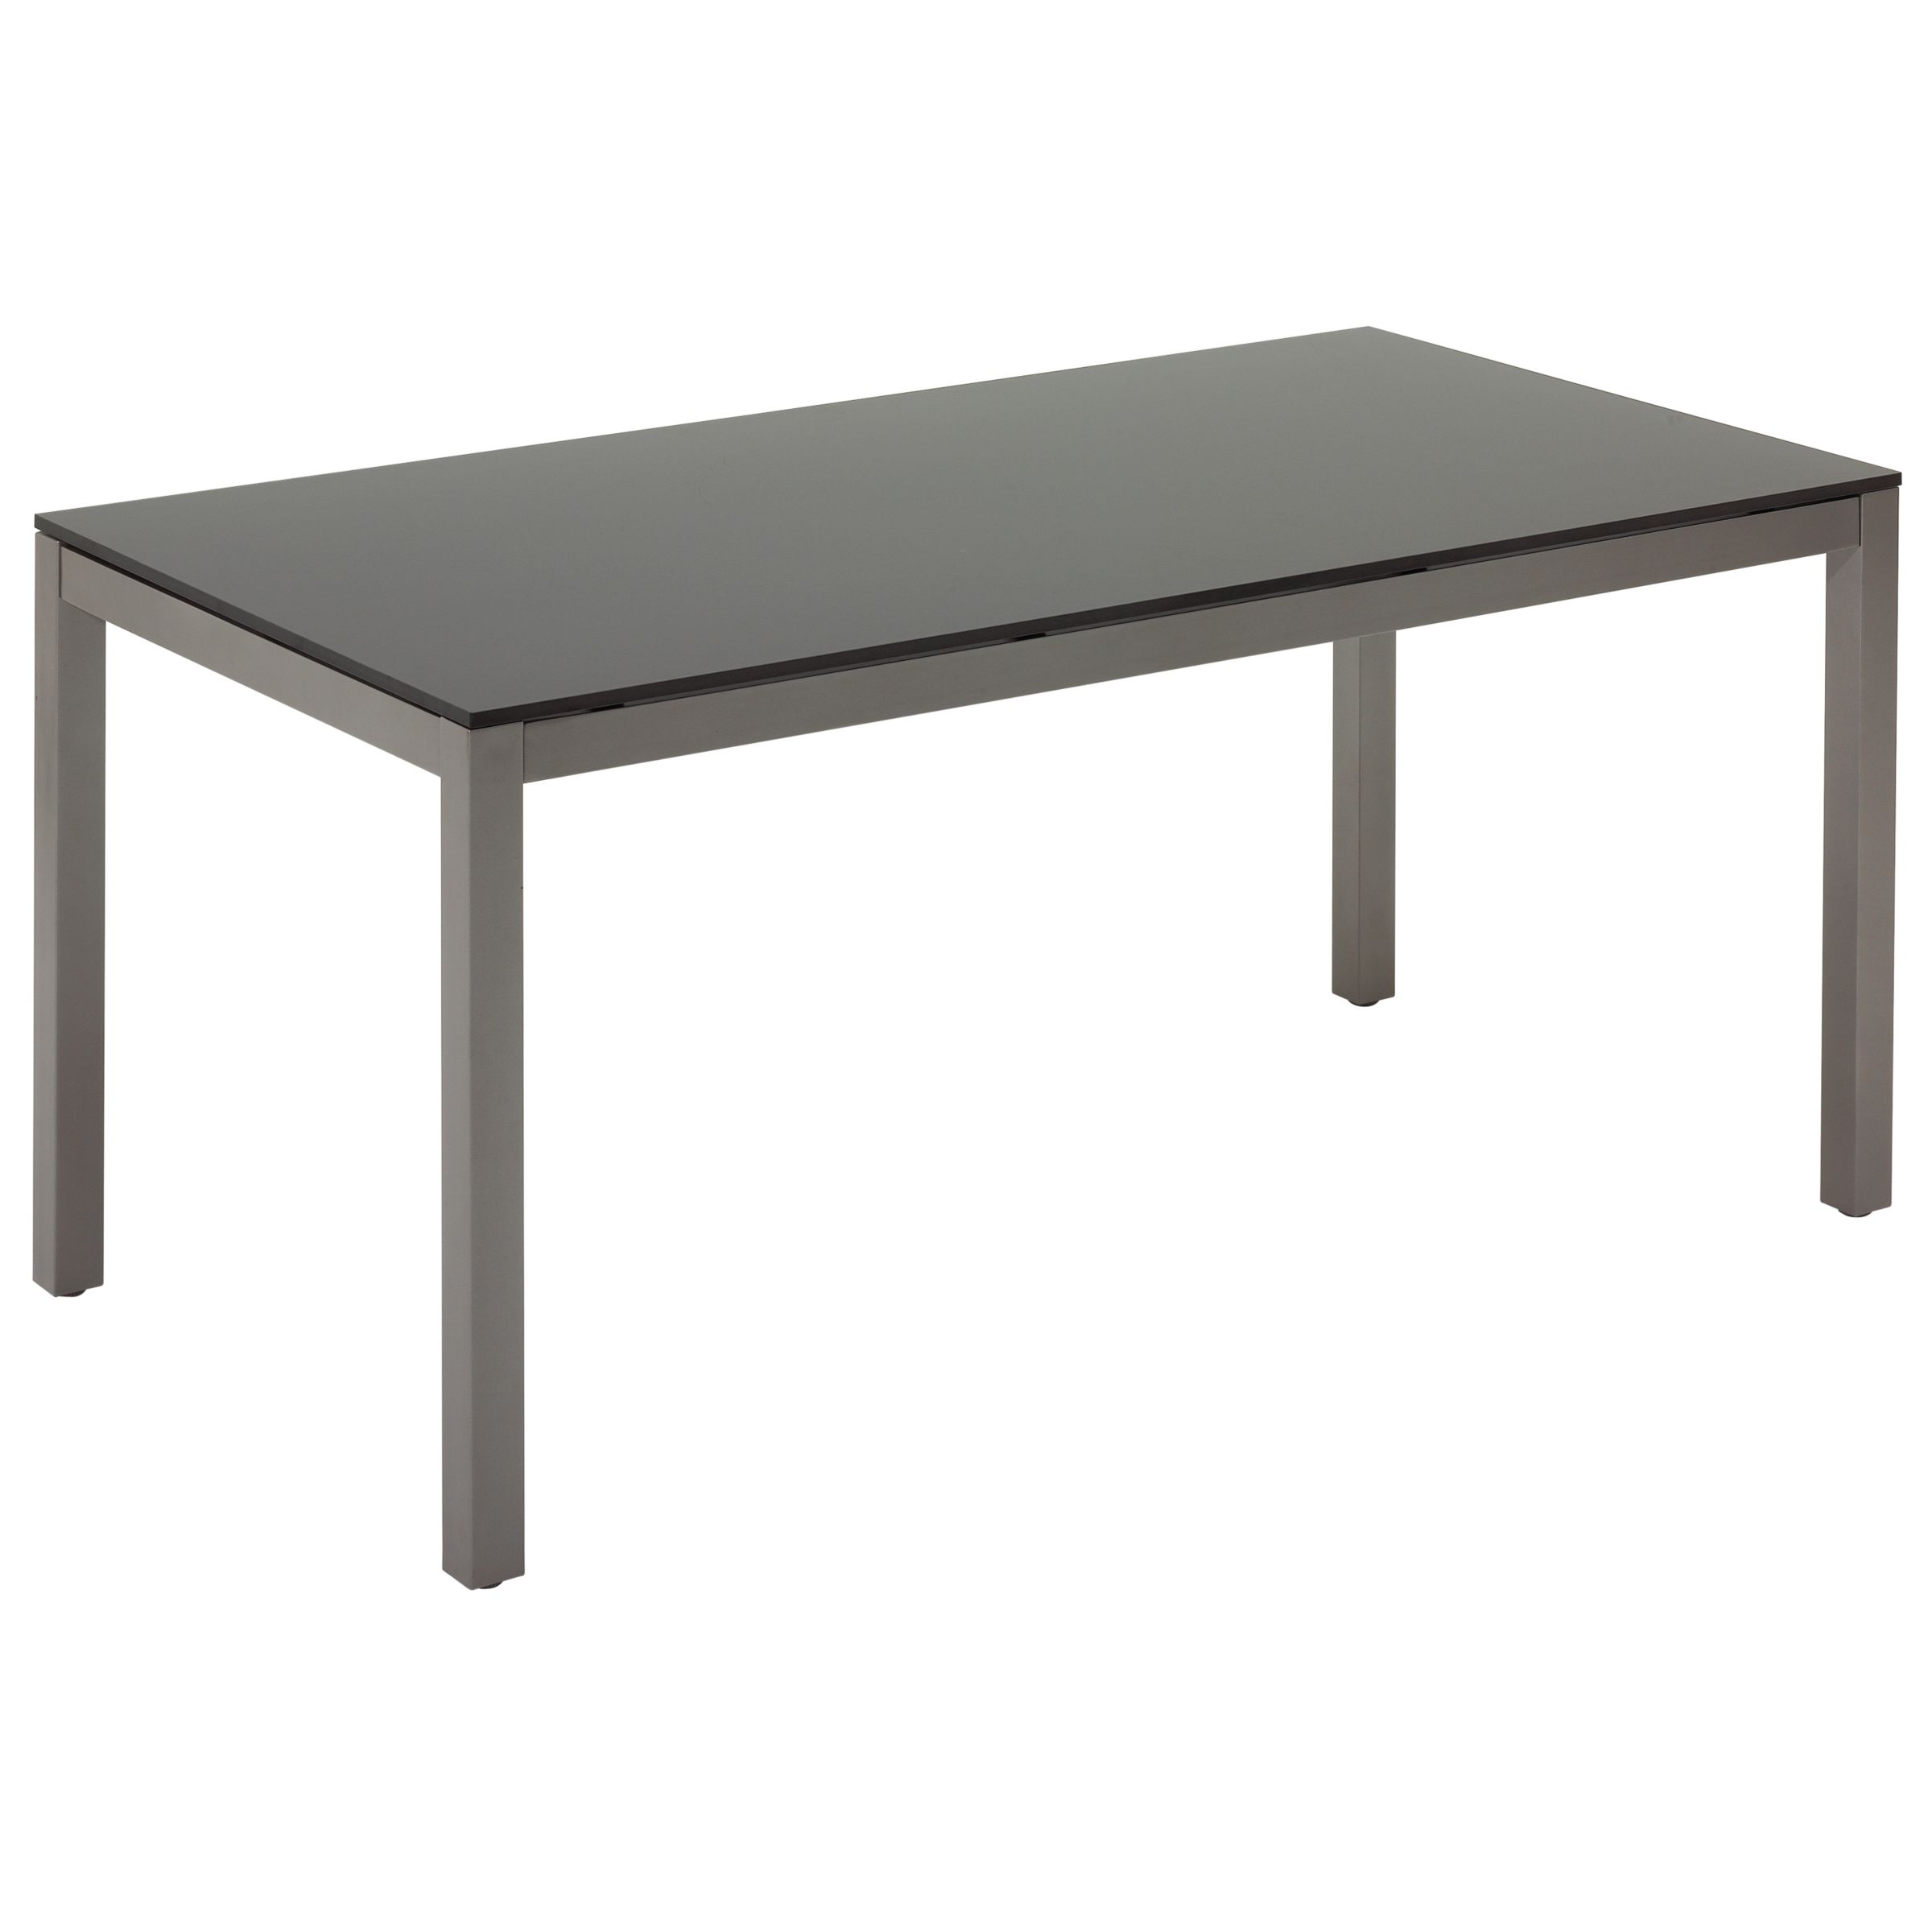 Gloster Azore Rectangular 6 Seater Outdoor Dining Table, Tungsten / HPL, width 160cm